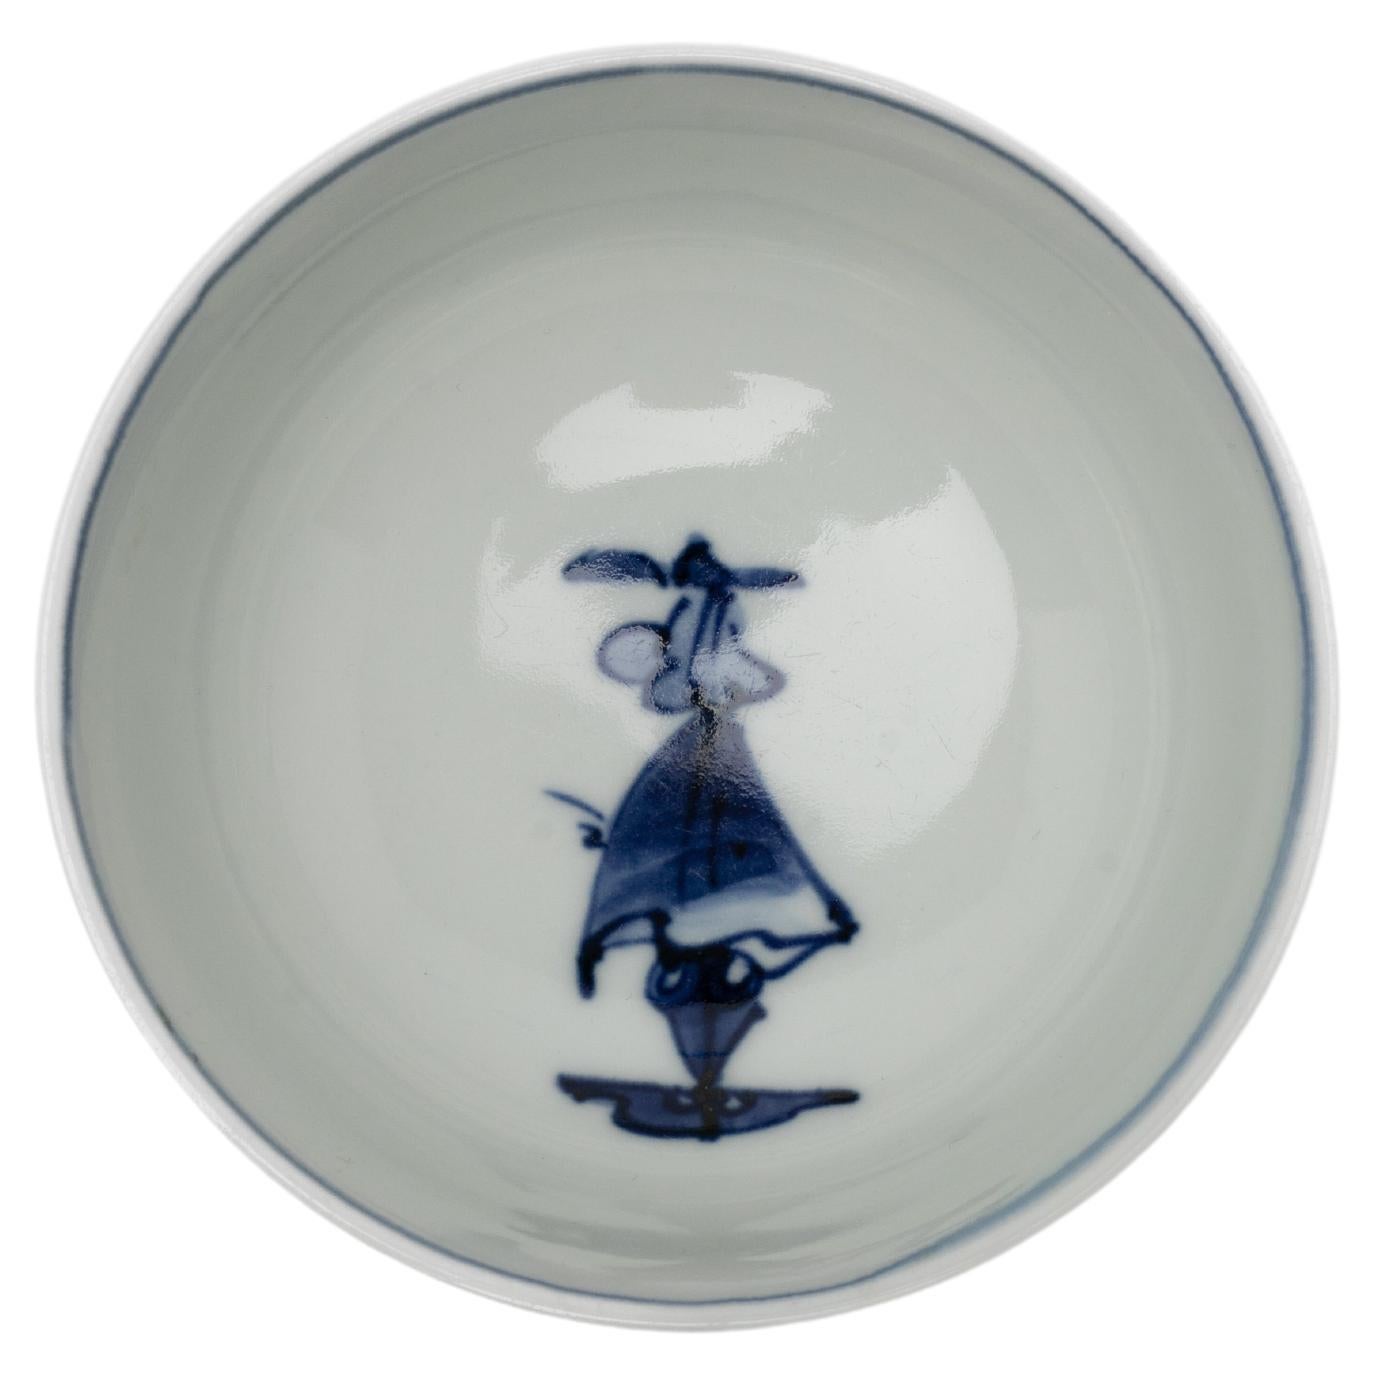 How much is Japanese porcelain worth?